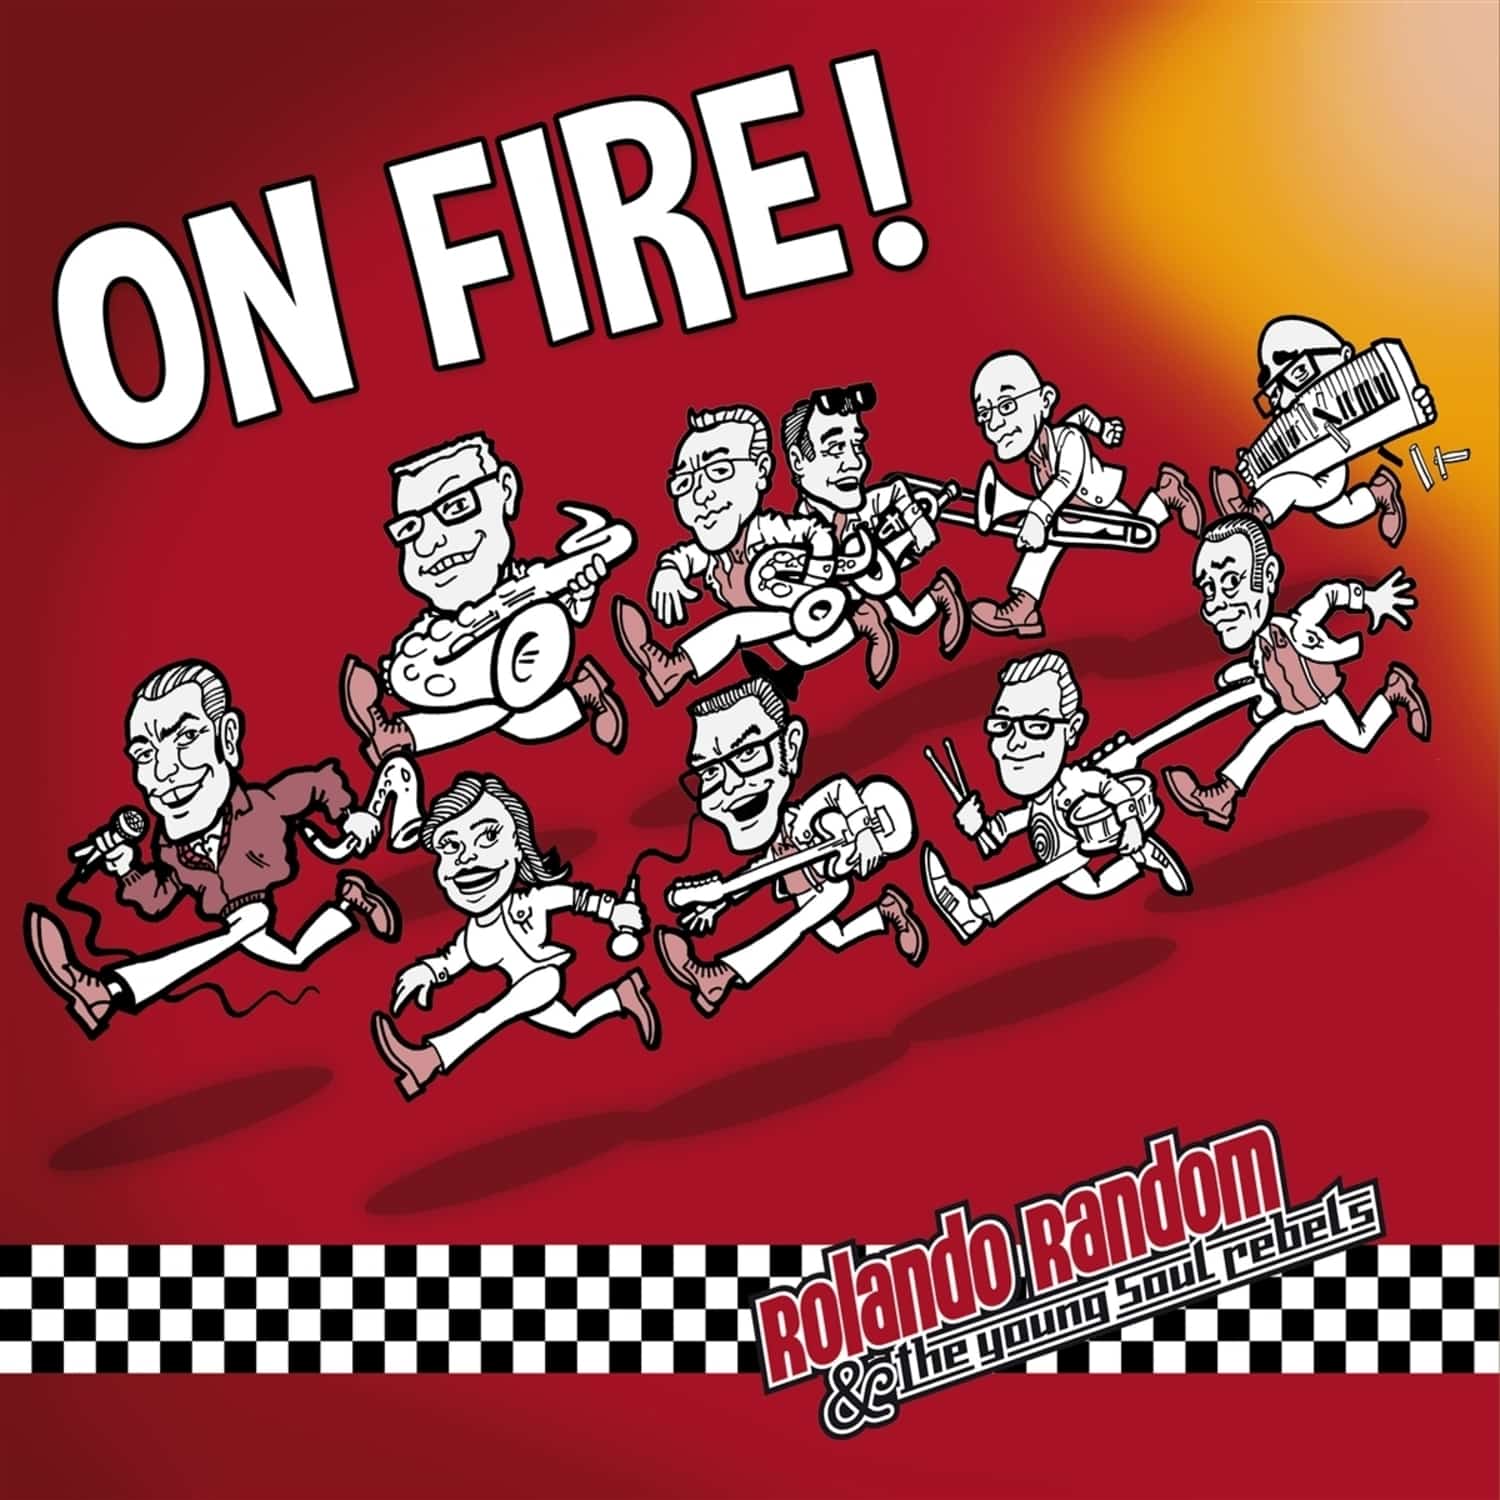 Rolando Random & the Young Soul Rebels - ON FIRE 